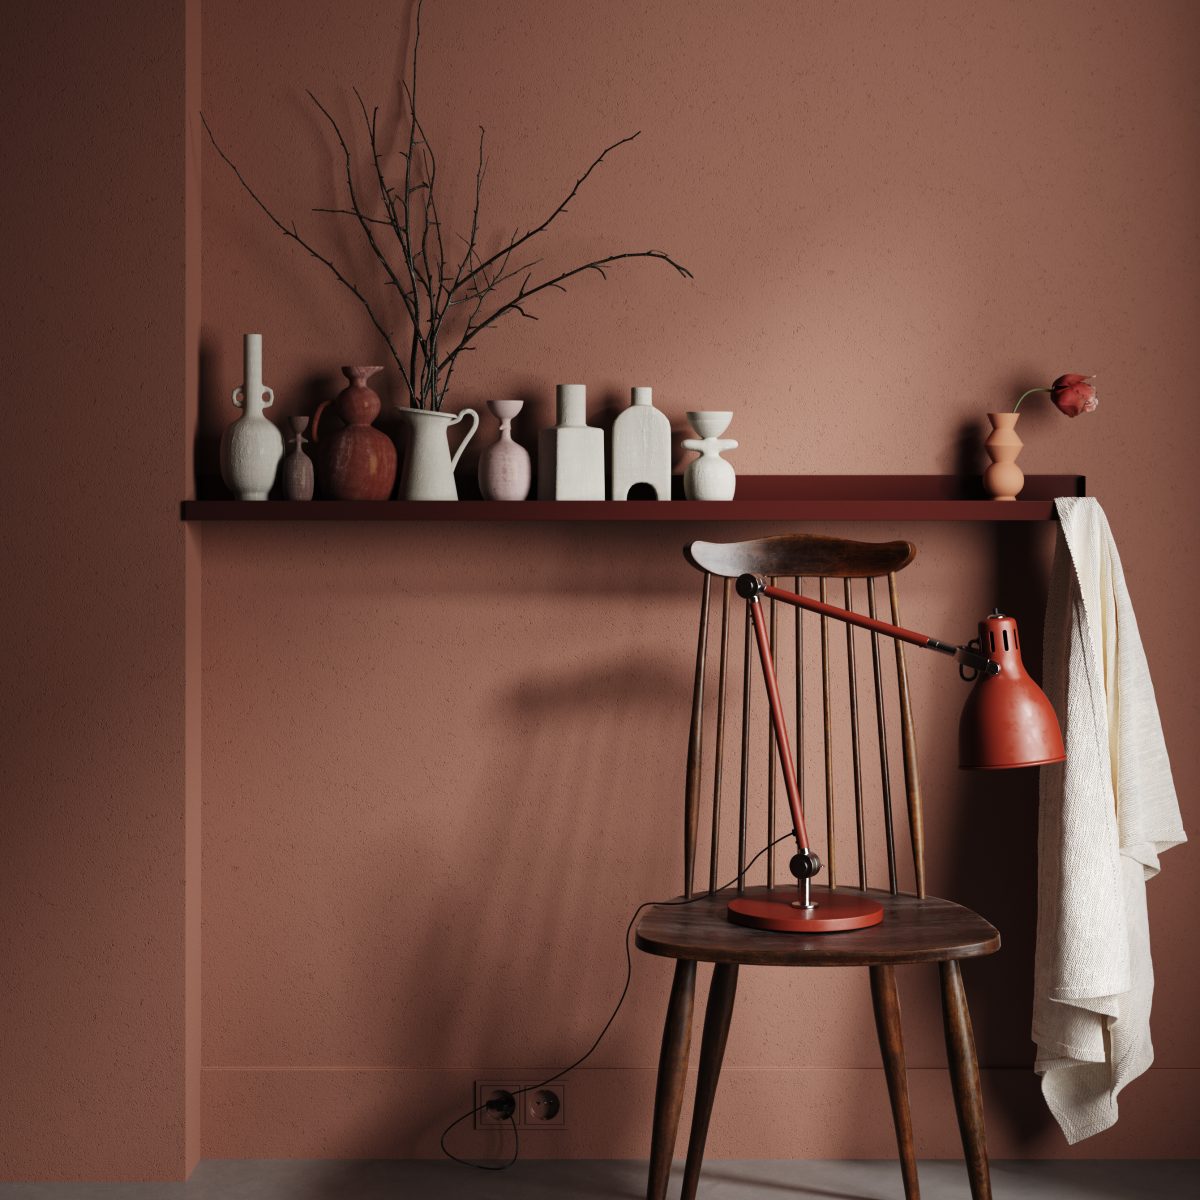 https://storables.com/wp-content/uploads/2021/03/Chair-with-lamp-and-vases-on-shelf-close-up-in-dark-brown-interior-3d-render-1200x1200.jpeg